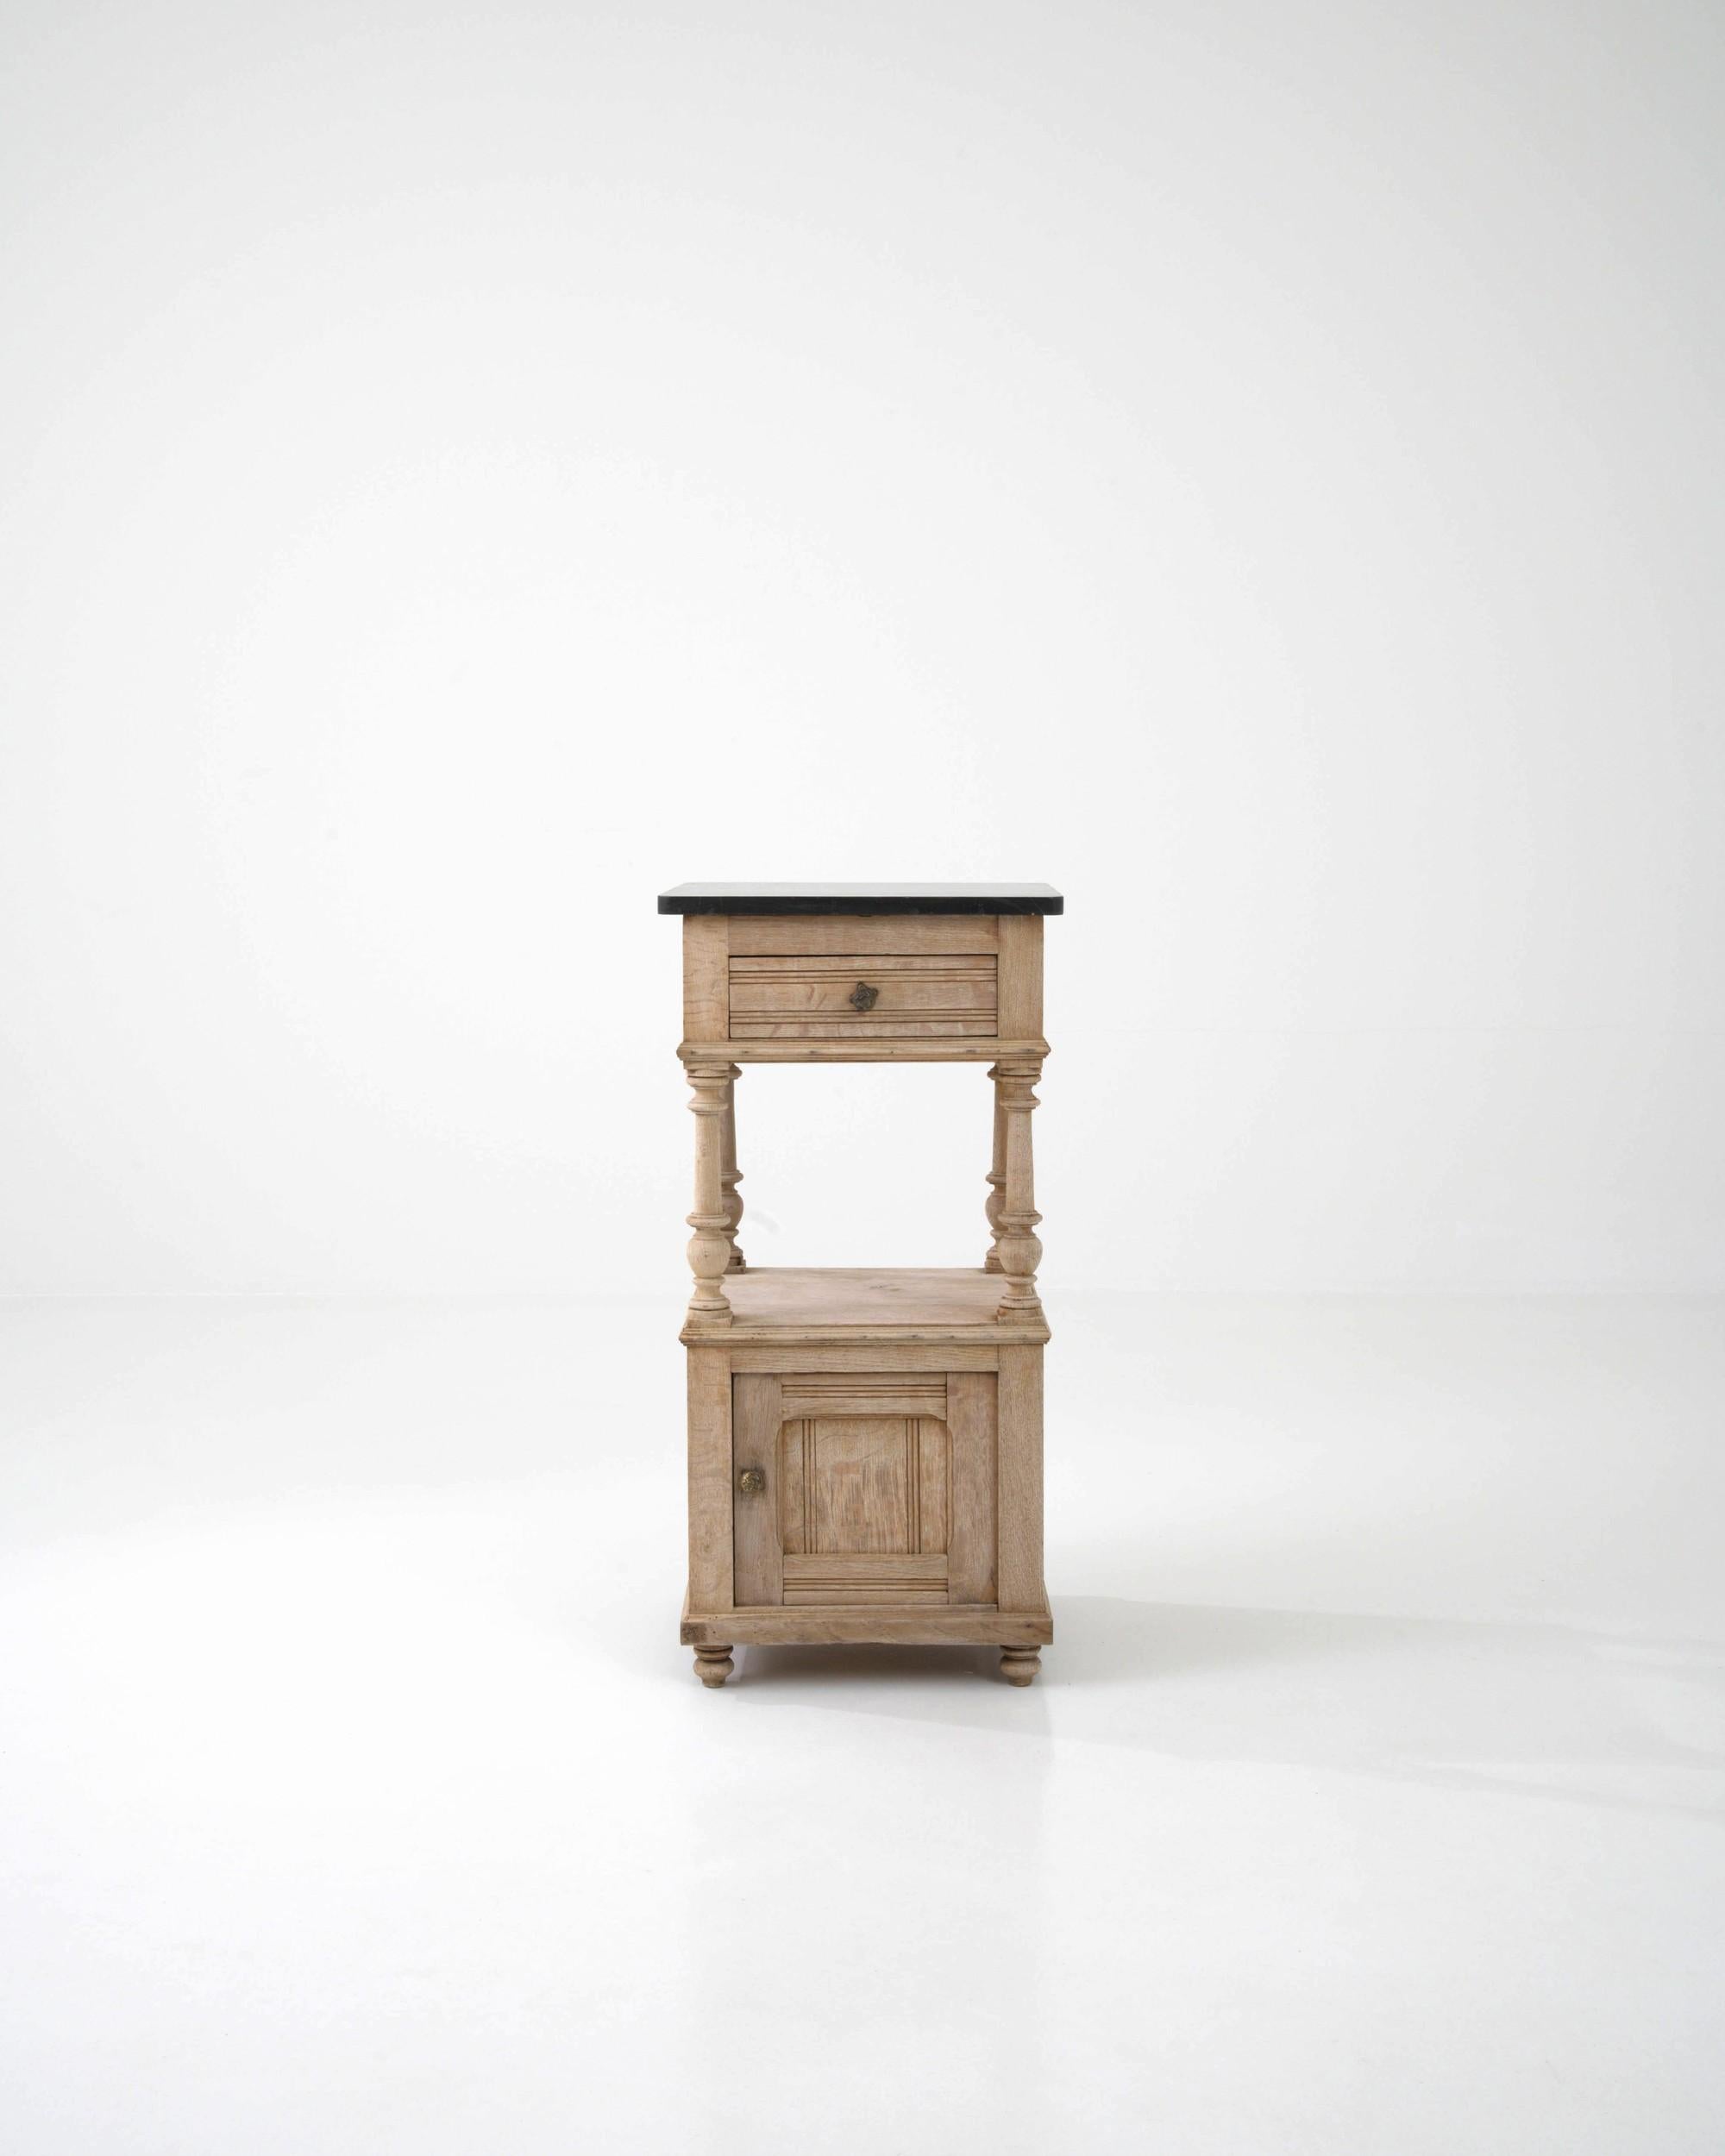 An oak night stand created in France circa 1900. Traditionally crafted, this subtly styled bedside table is adorned with a stone top, projecting a sense of calm and refined elegance. Cloudy gray veins drift through the dark slate colored stone